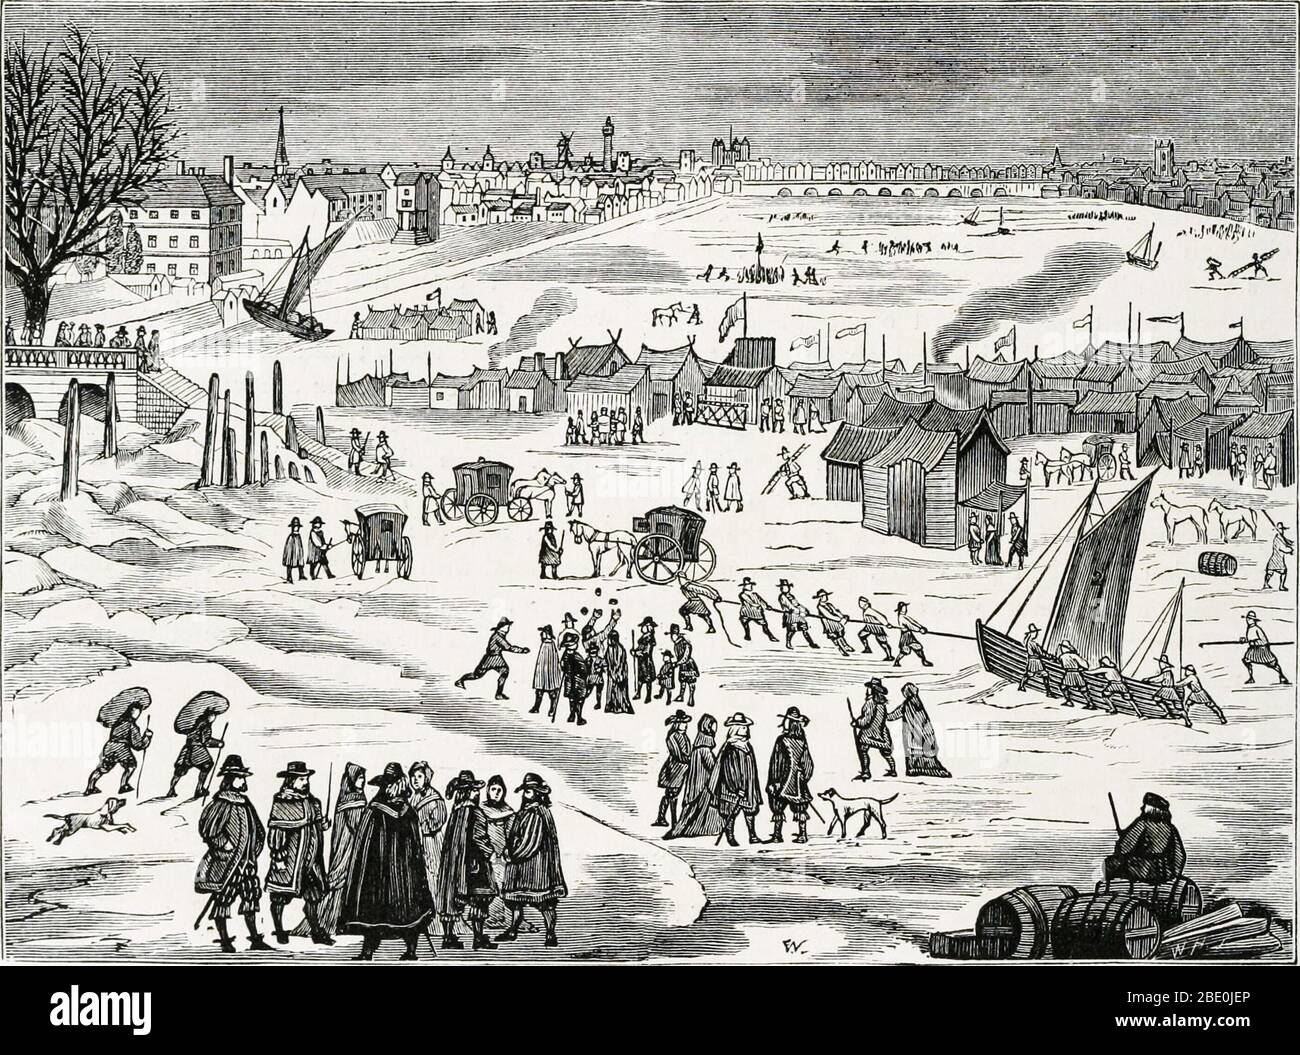 A Frost Fair on the Thames, looking downstream towards London Bridge, during the Great Frost of 1683-4, when the river was completely frozen for two months. It was the worst recorded frost in England and similar conditions affected much of Europe as well. The period between the 15th and early 19th century was known as the Little Ice Age.  The Little Ice Age was a period of cooling that occurred during a period generally thought to run from the 16th to the 19th centuries, though some place the start date in the early 14th century. During the period 1645-1715, in the middle of the Little Ice Age Stock Photo